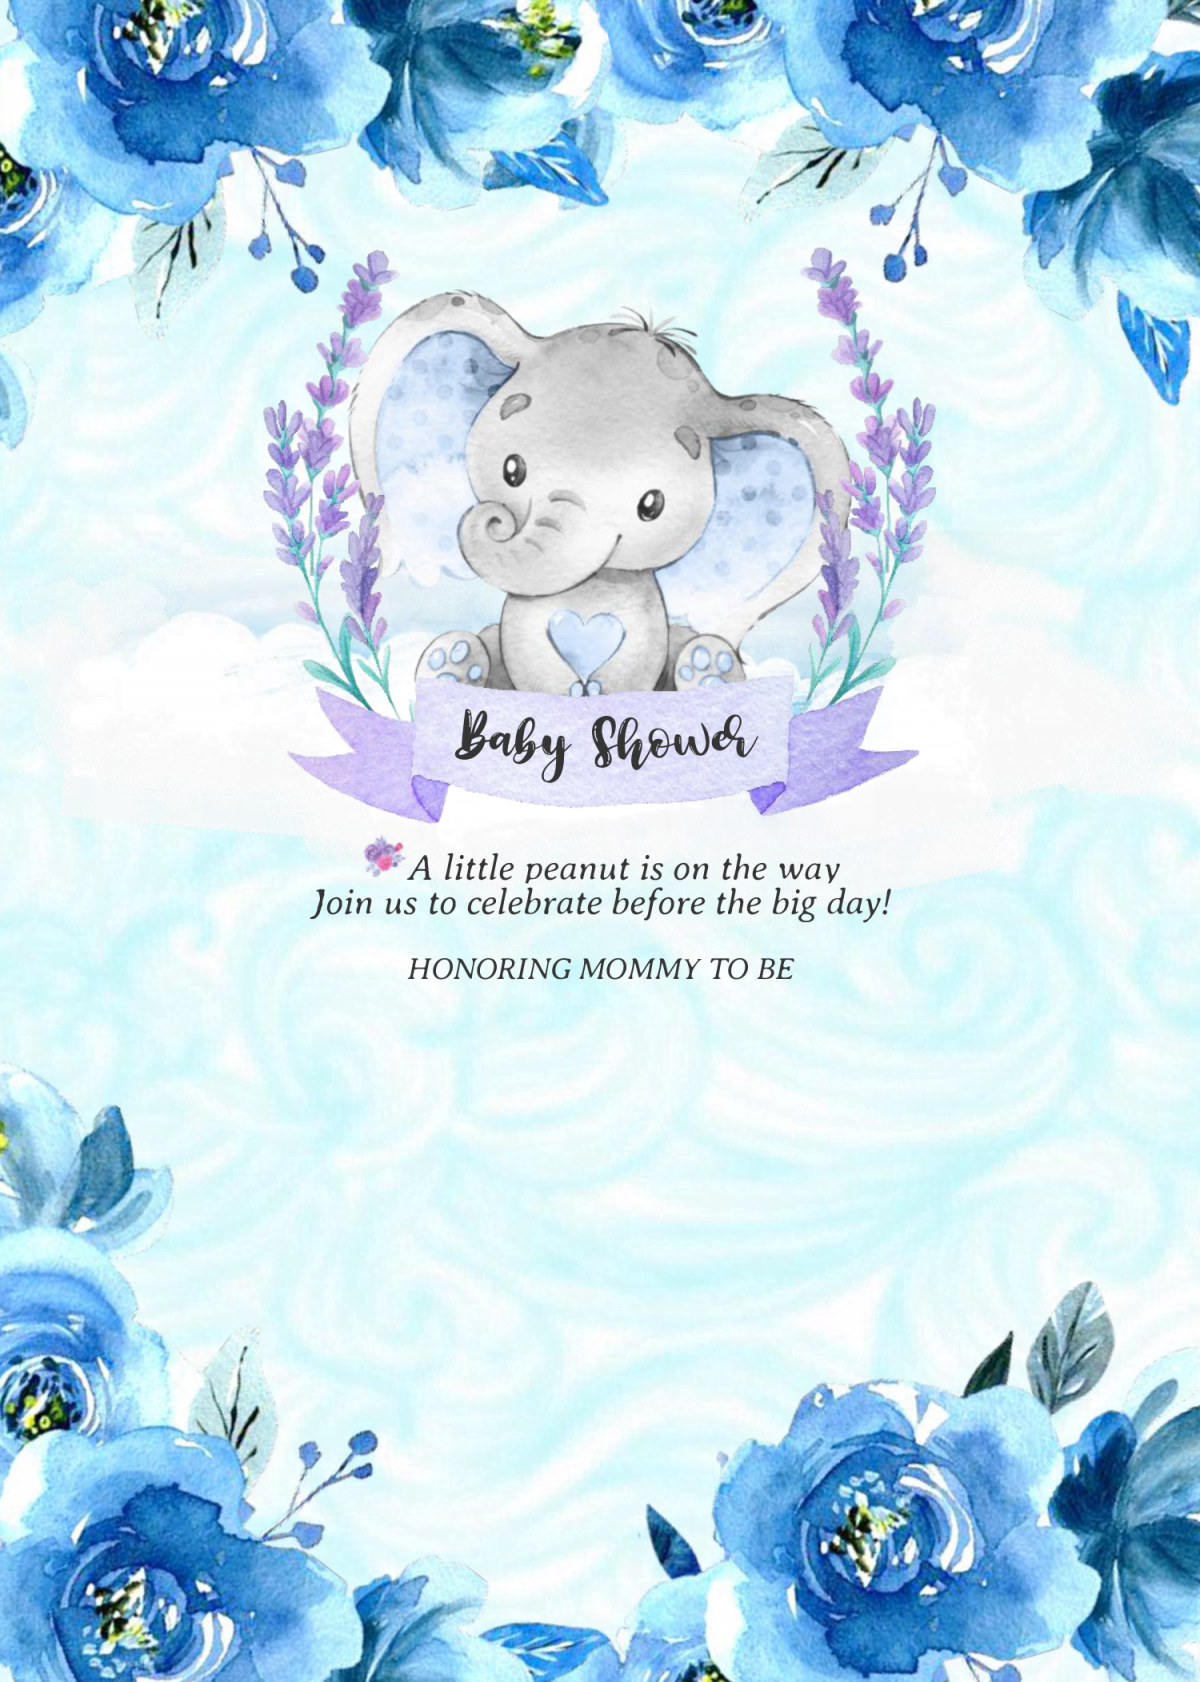 Watercolor Baby Elephant Invitation Templates - Editable With MS Word and has cloud shades